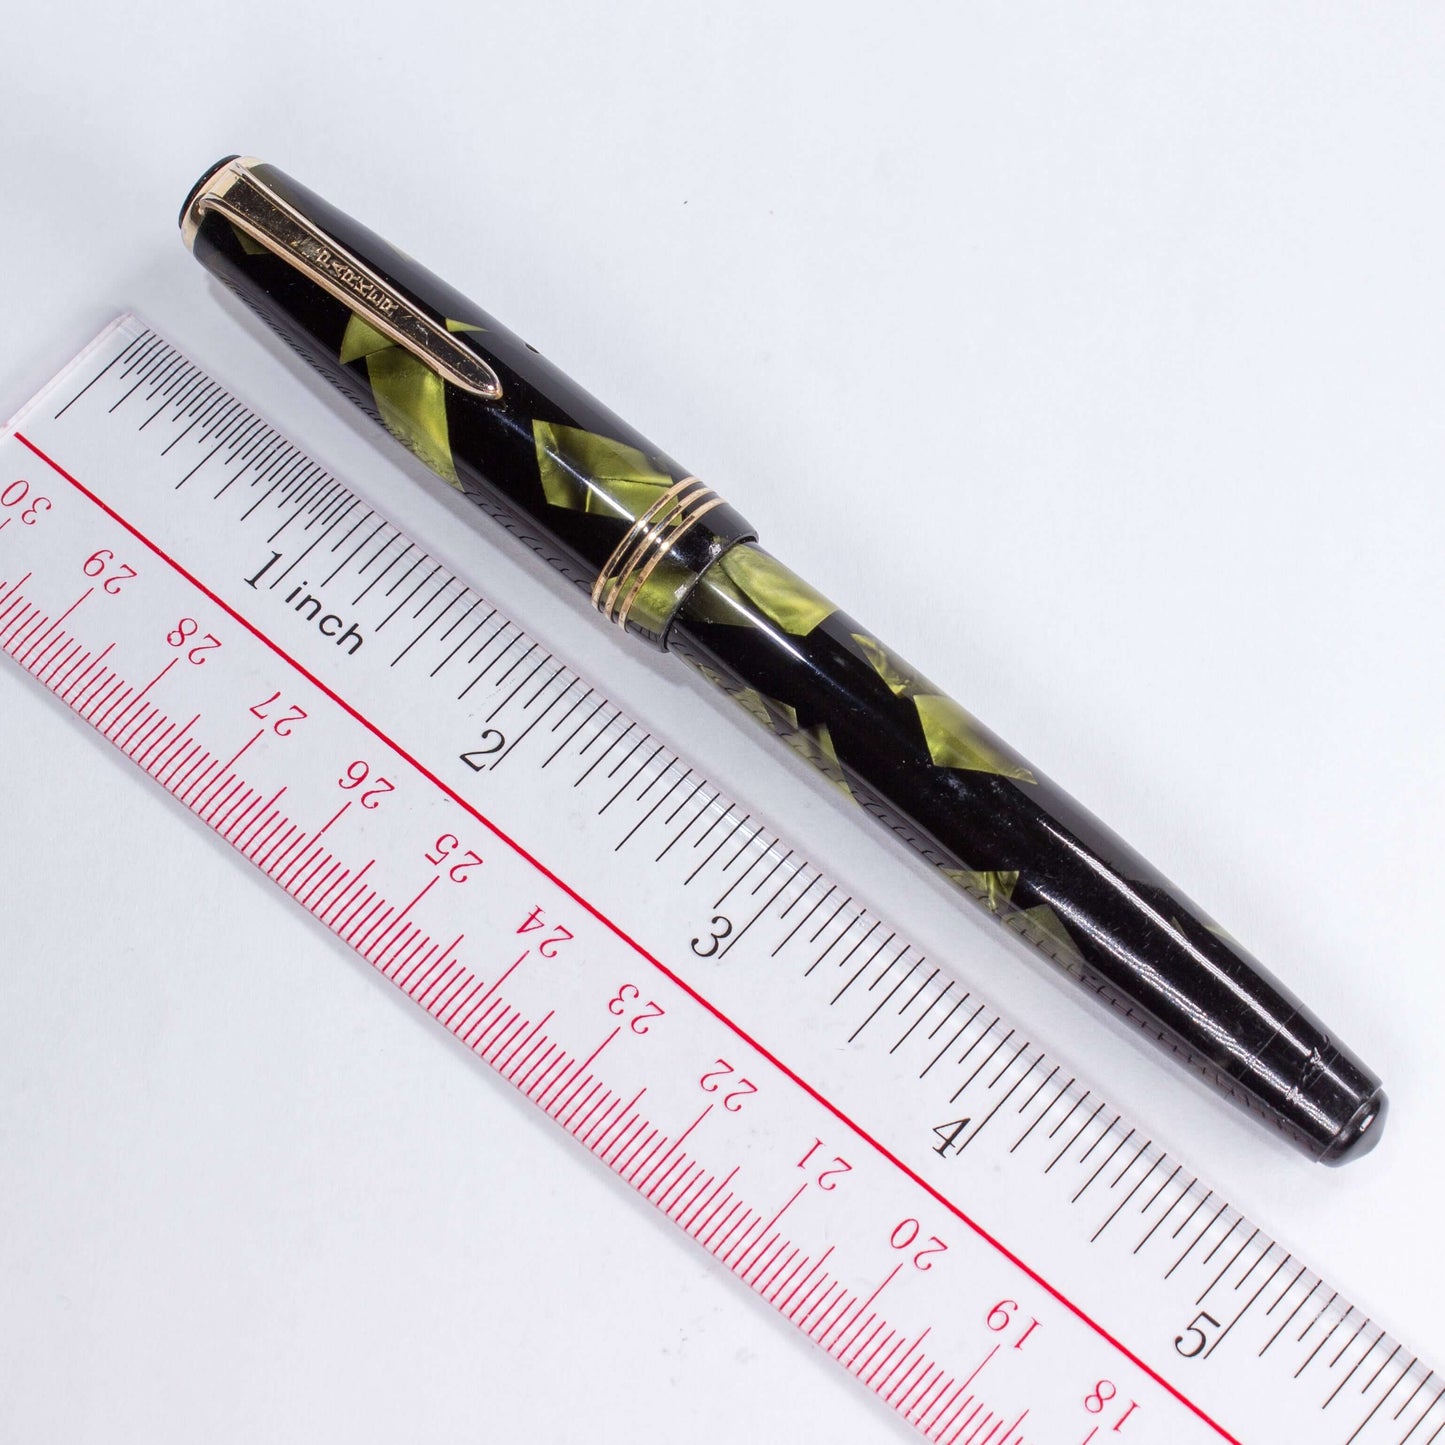 Parker Challenger Fountain Pen, Green Marbled, Gold Filled Clip and three Cap Bands, Button Filler, 14K Gold Nib Name/Type: Parker Challenger Restored Vintage Fountain Pen Manufacture Year: 1930s Length: 5 Filling System: Button Filler Color/Pattern: Gree